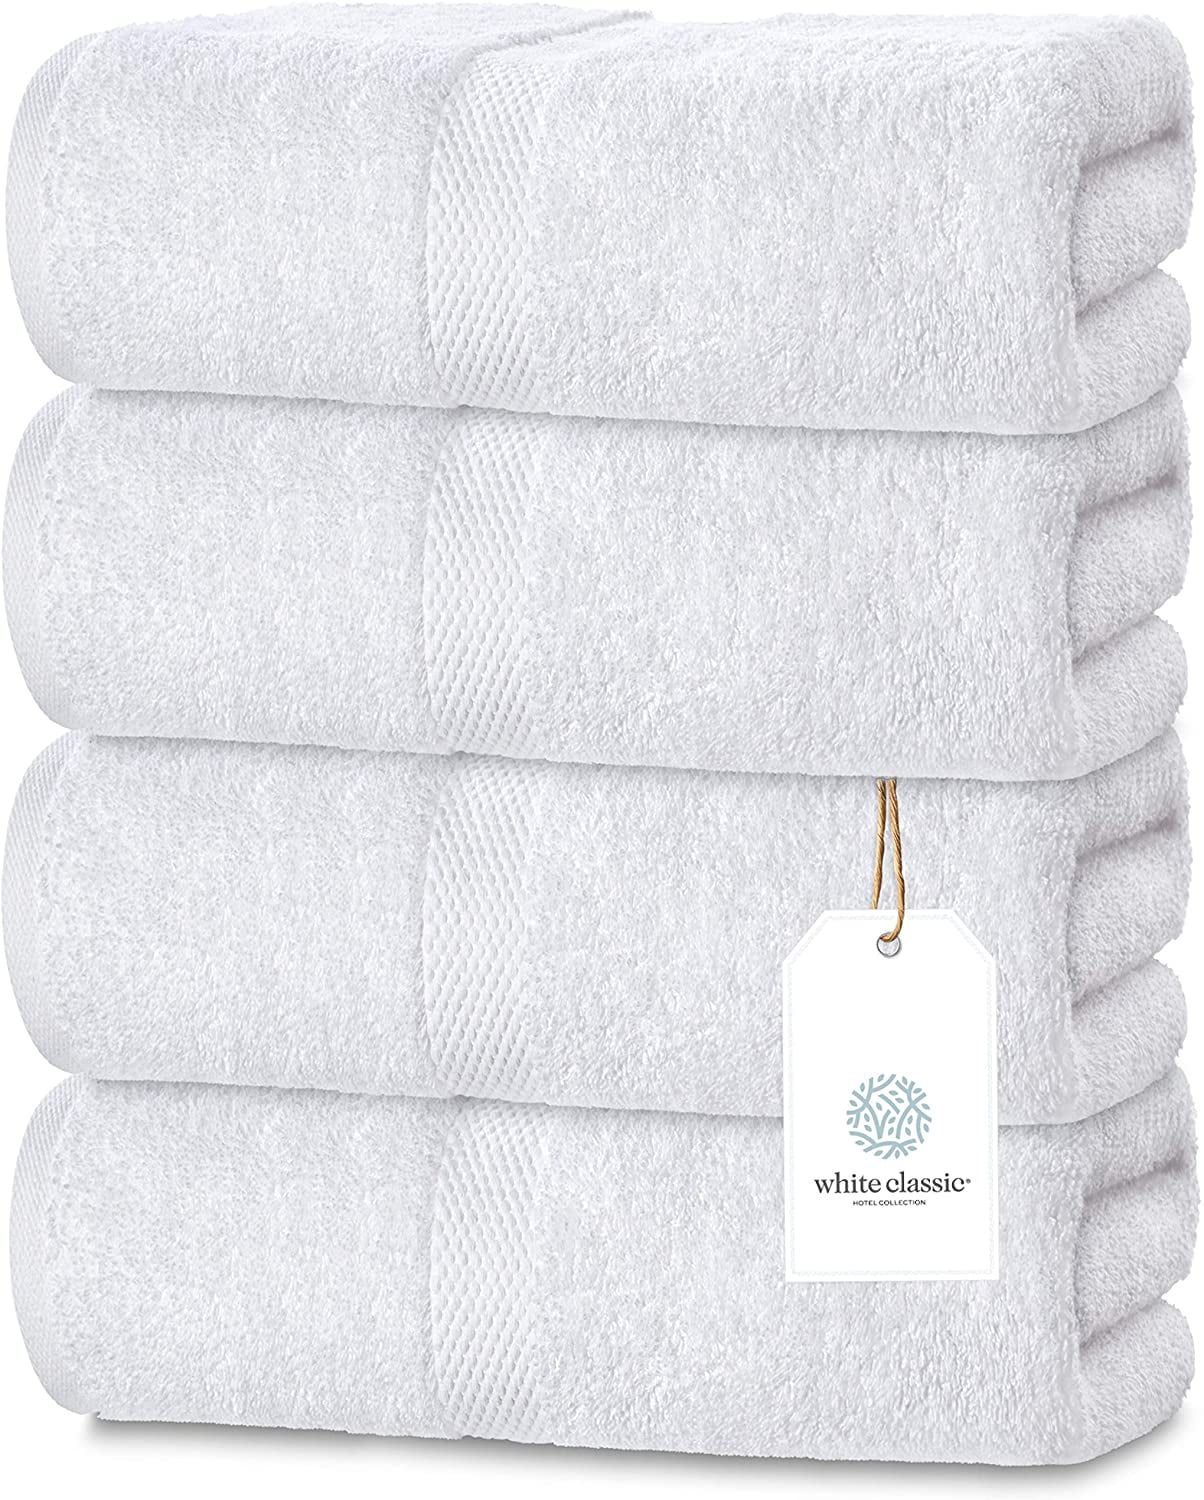 Cotton Bath Towels Soft and Absorbent Spa Towel 27x52-2 Pack 